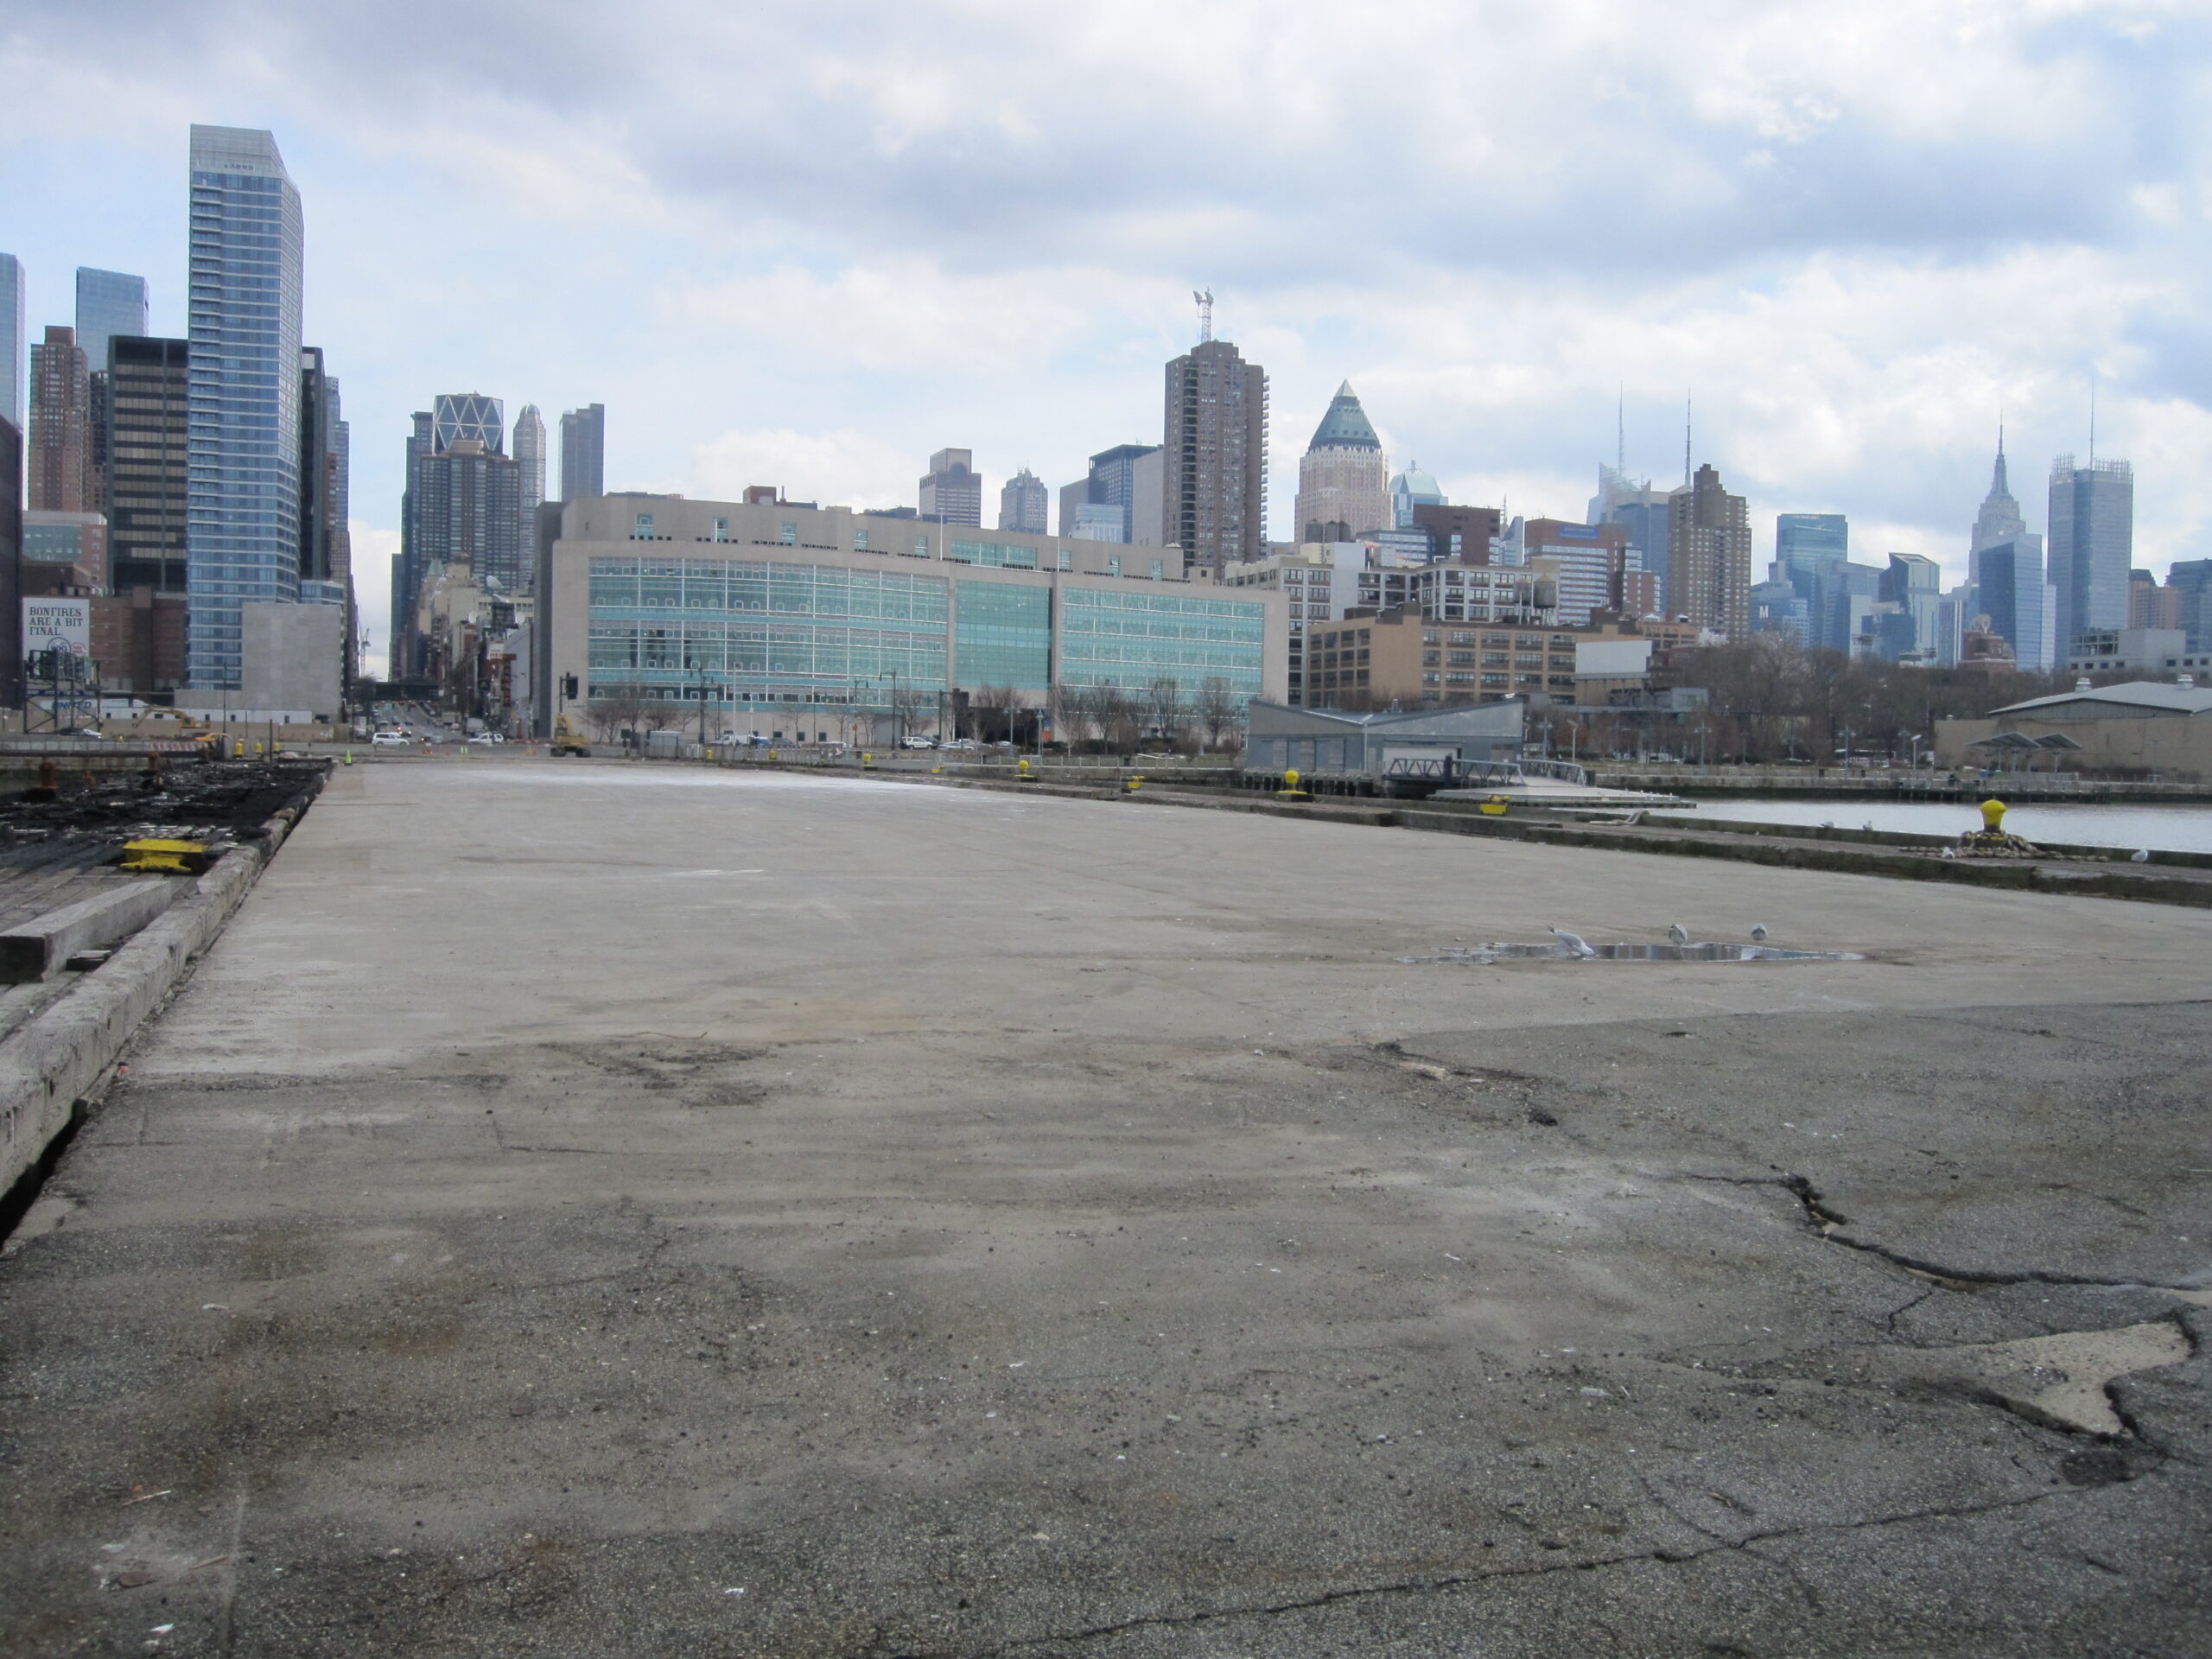 Pier 97 on the Hudson River prior to Hudson River Park's reconstruction of the pier. The pier is largely asphalt with a few cracks in it.